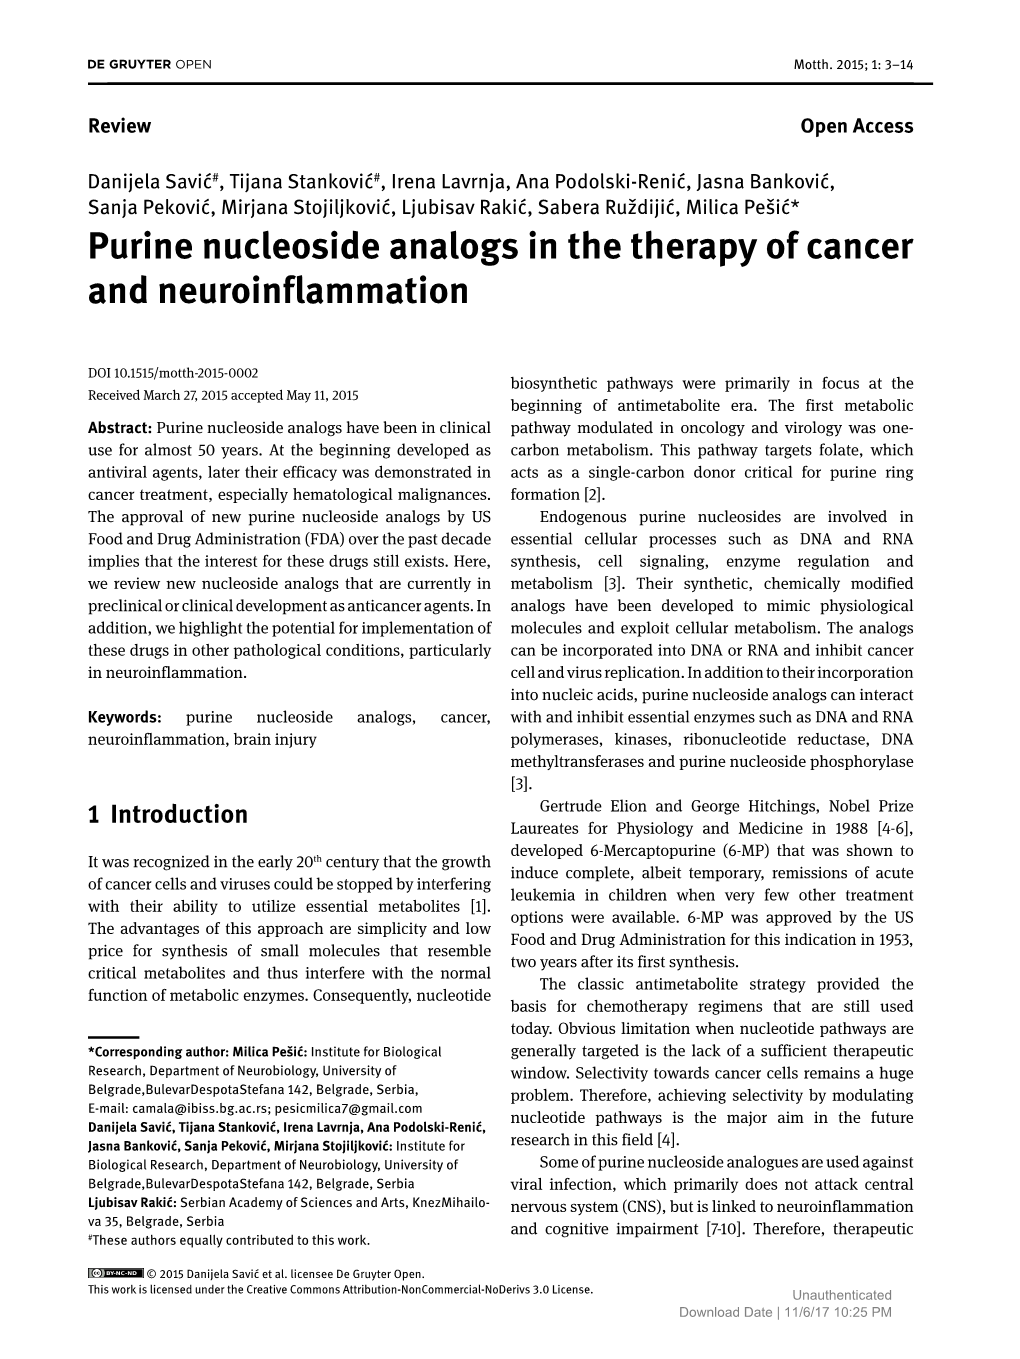 Purine Nucleoside Analogs in the Therapy of Cancer and Neuroinflammation